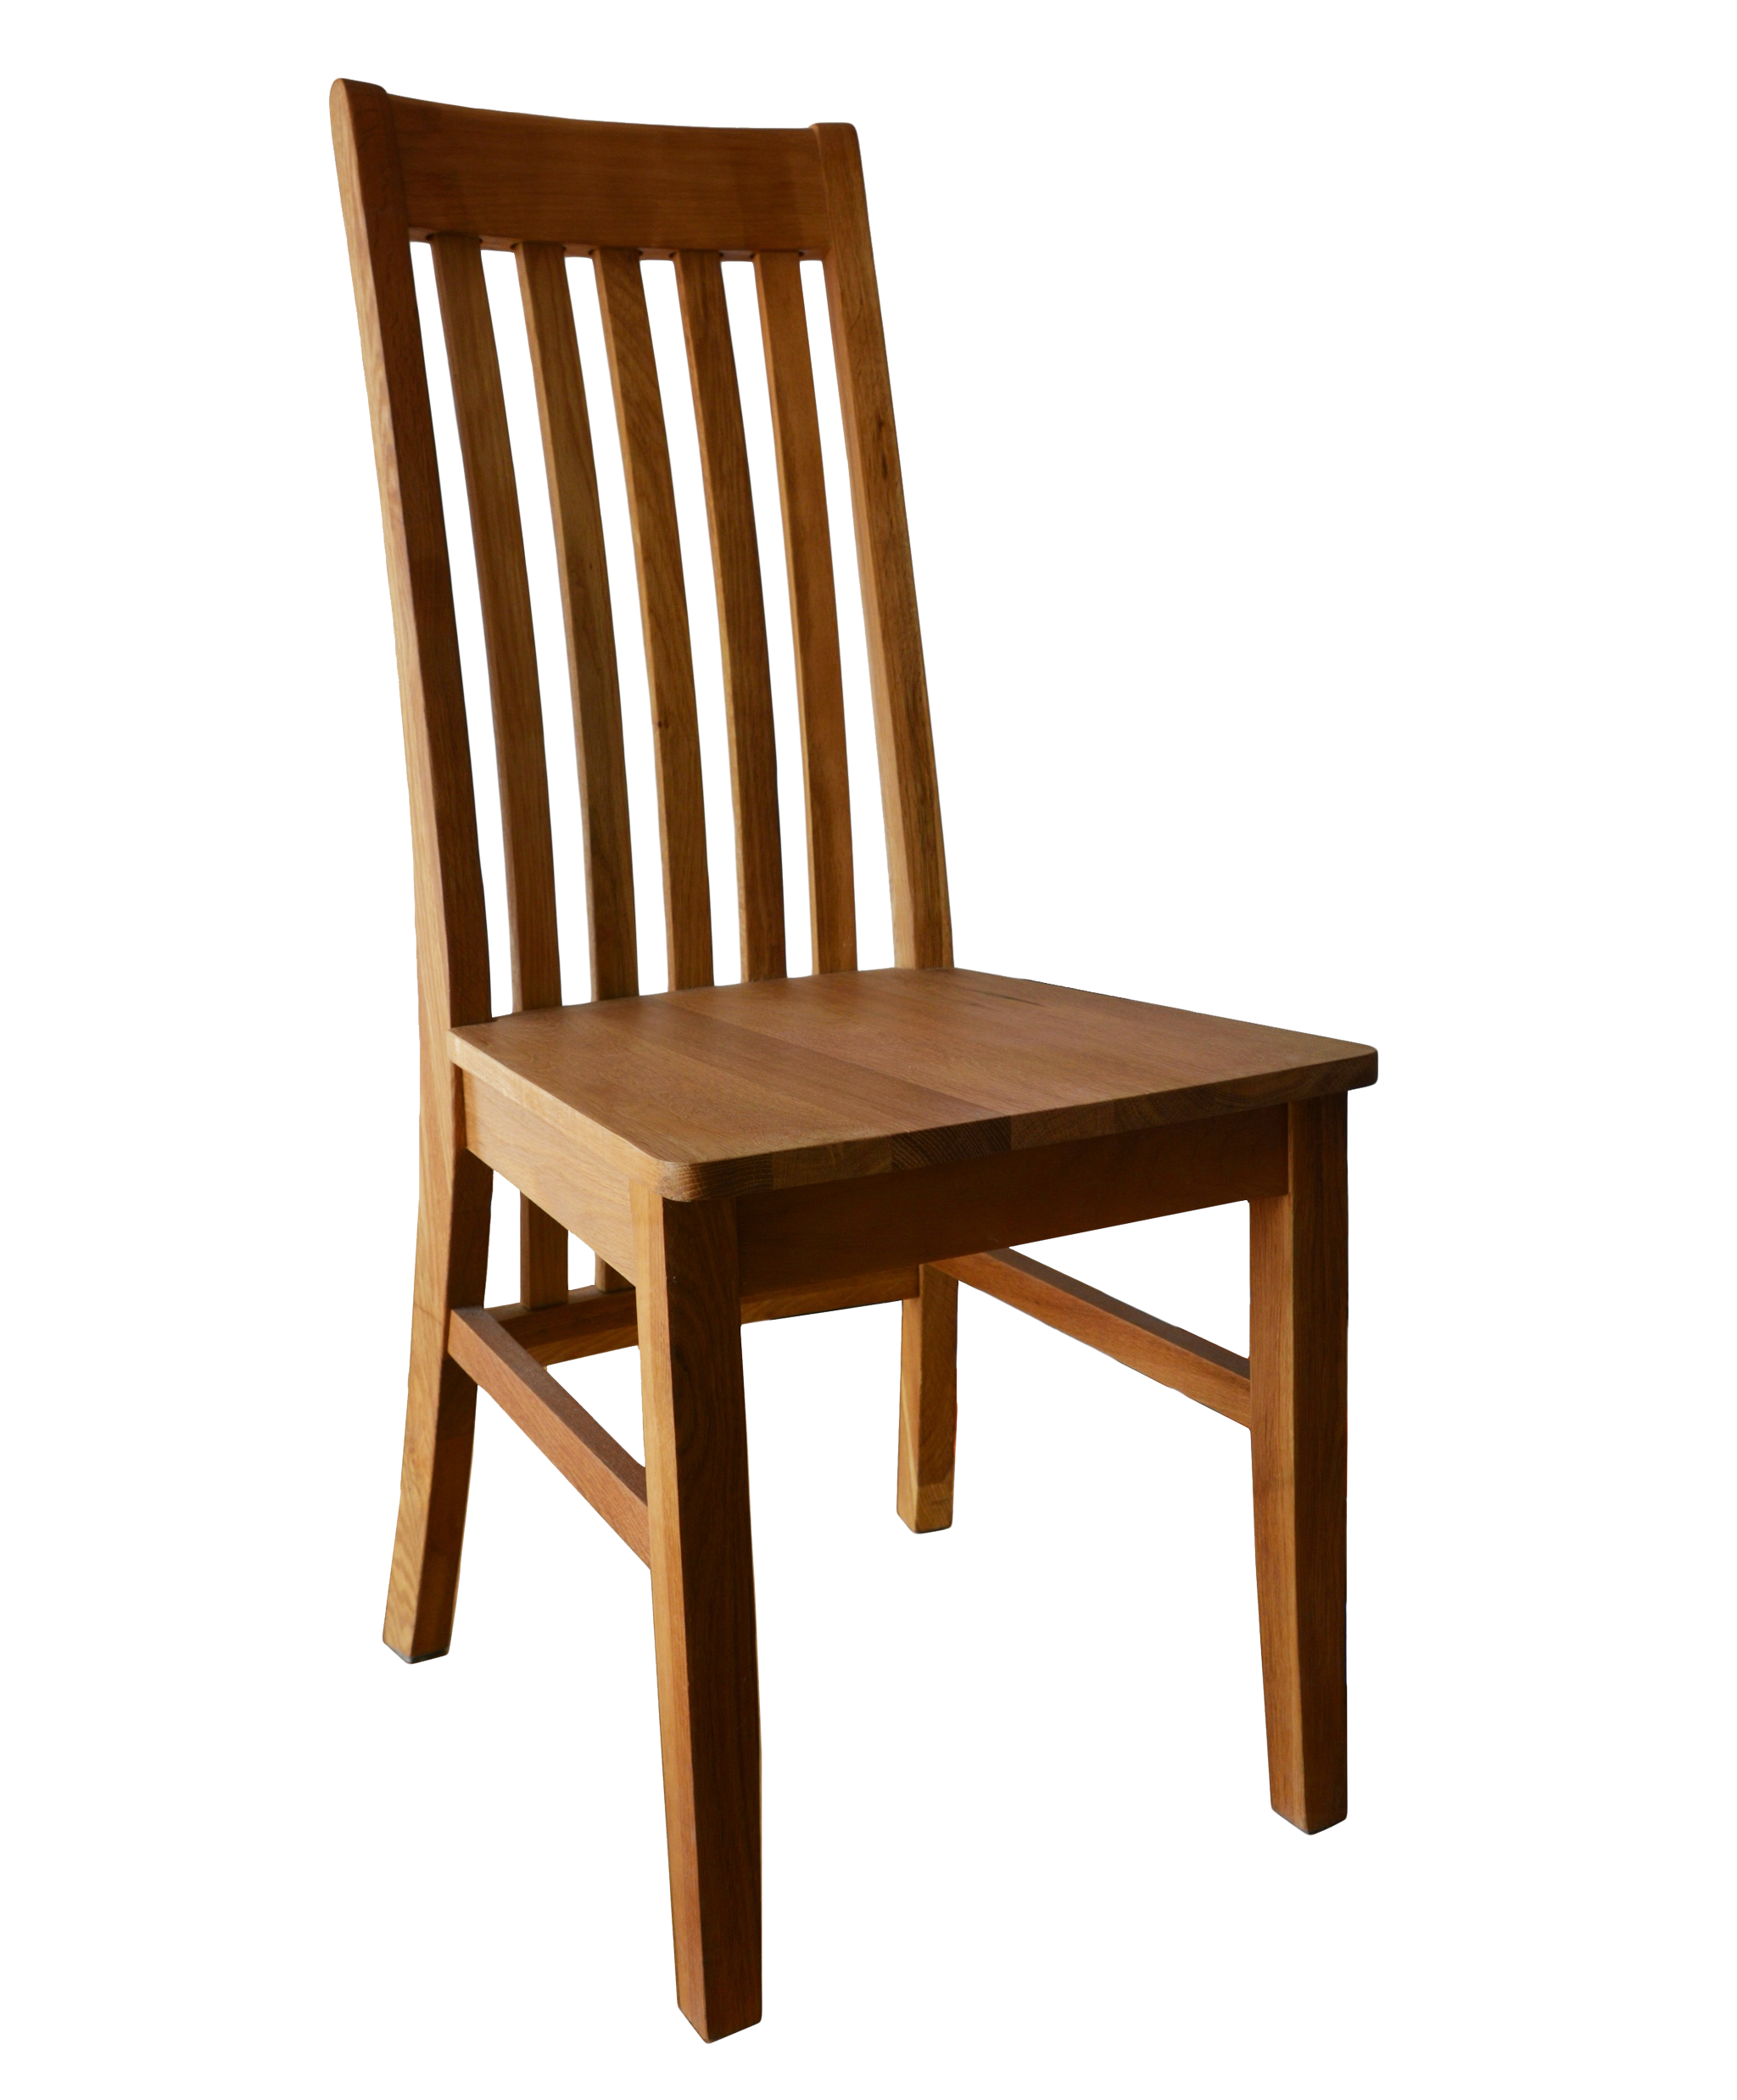 Clipart chair brown object. Wooden kitchen png image